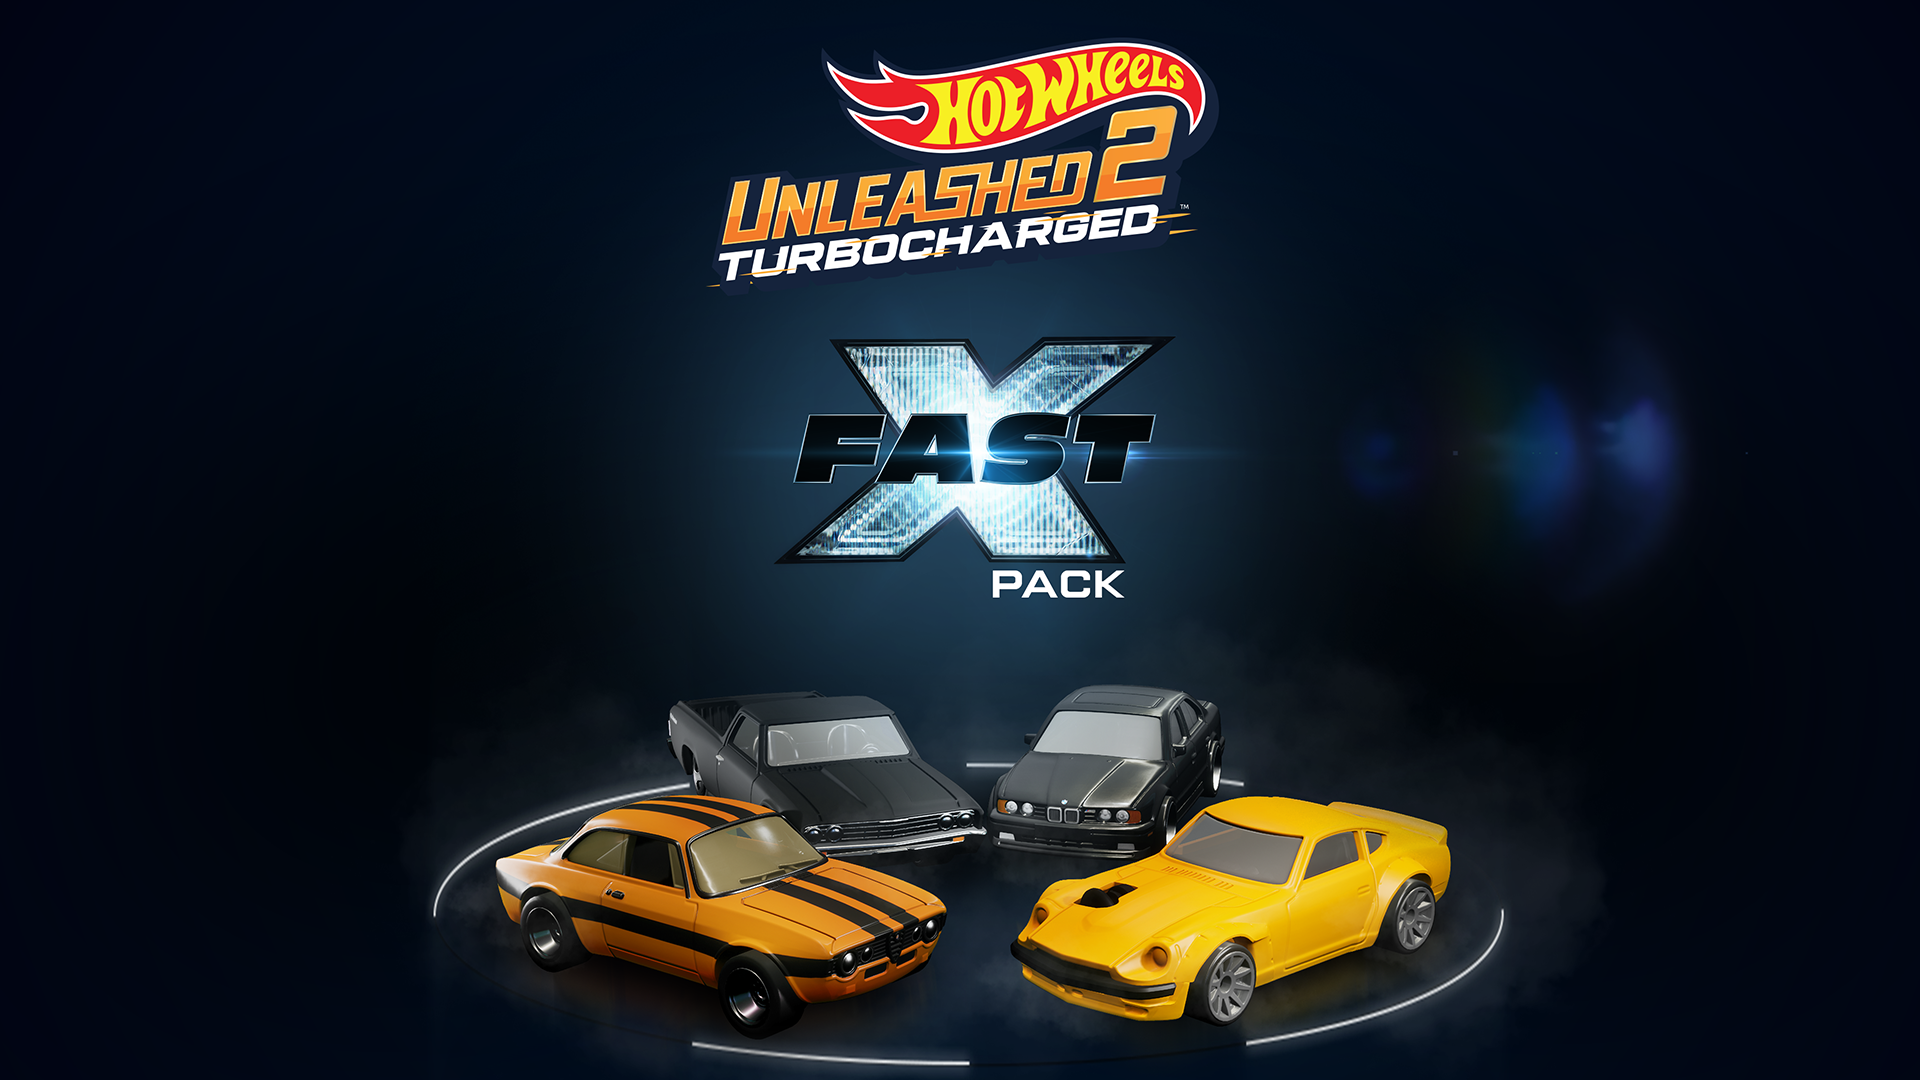 Milestone & Mattel Unveil The Upcoming Fast X Pack For Hot Wheels Unleashed 2 – Turbocharged